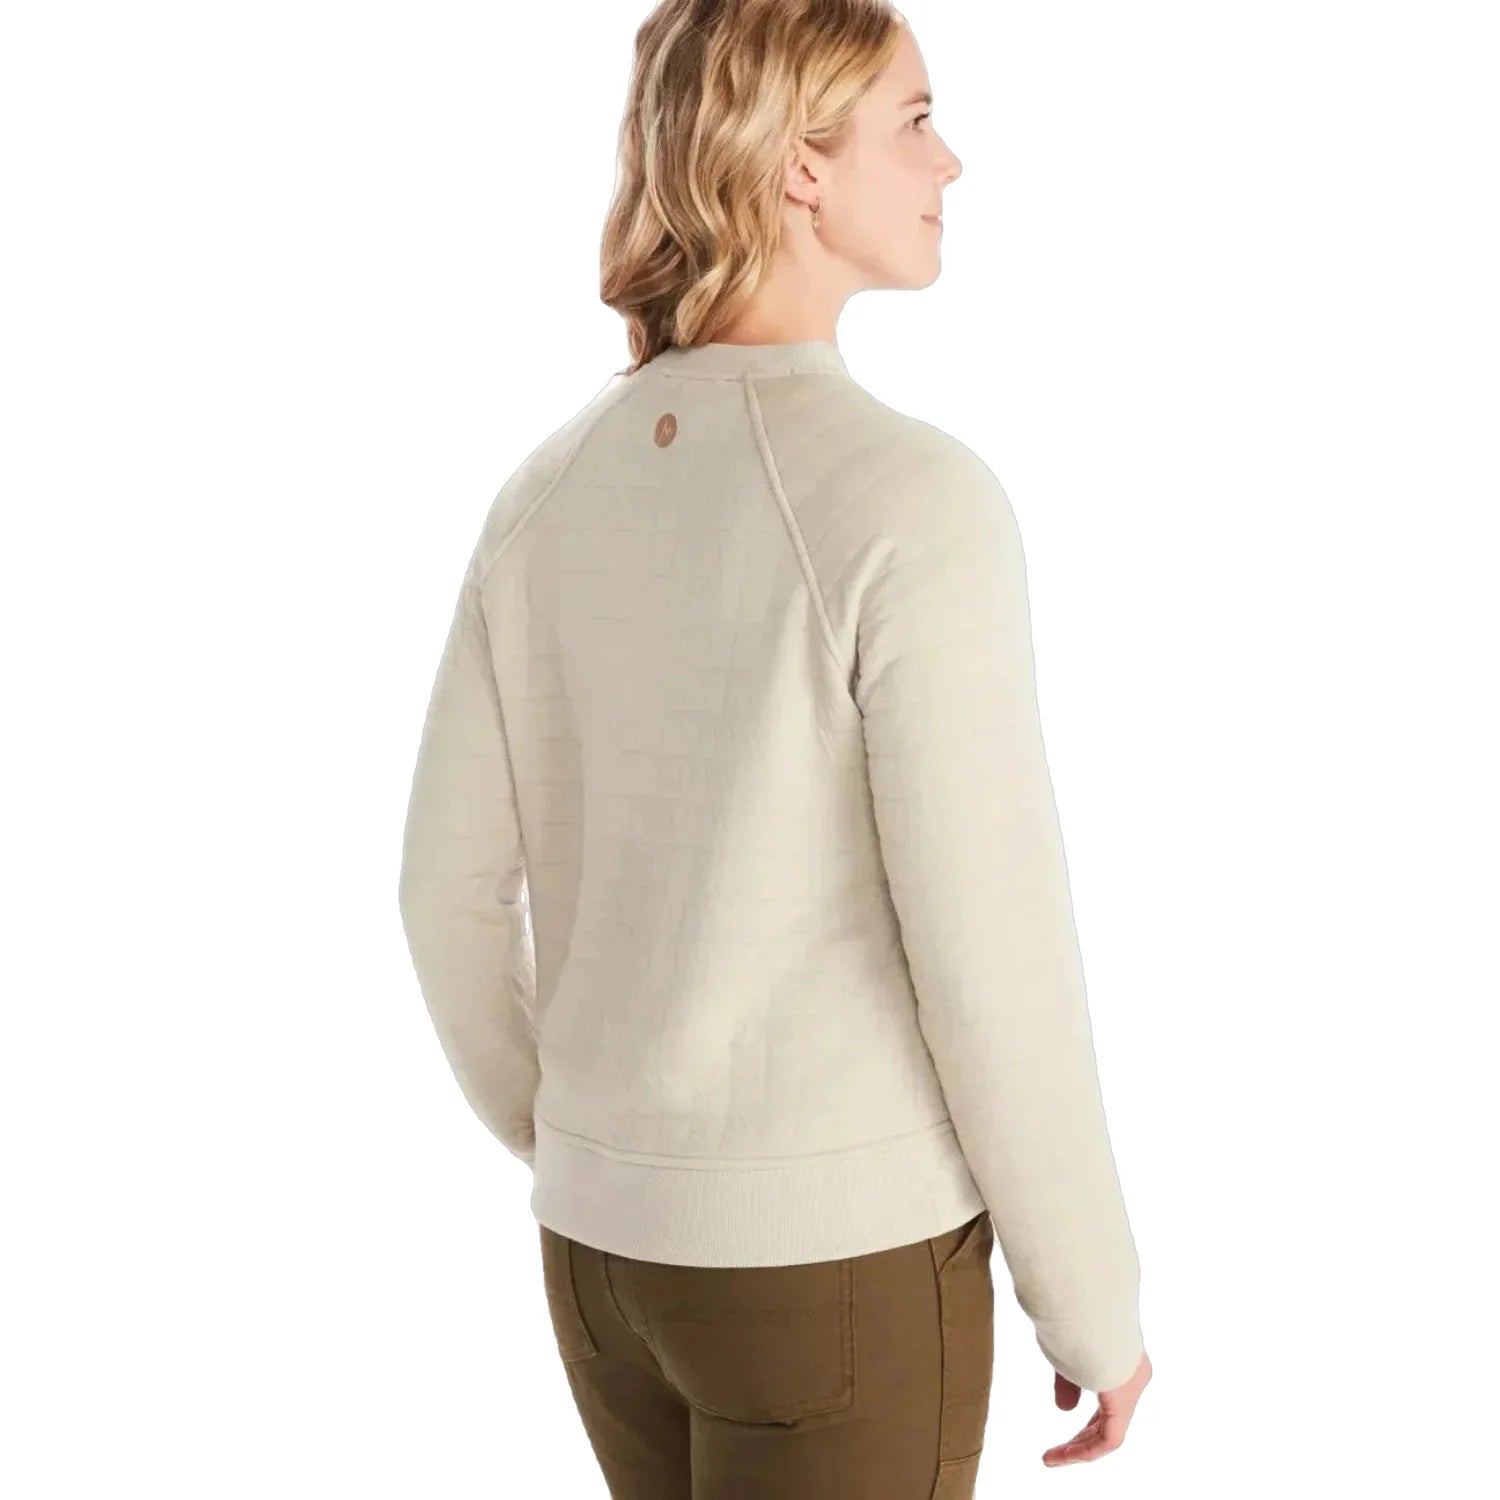 Marmot Roice Sweatshirt in Sandbar Off-white. Quilted Sweatshirt that hits at the hip. Back View.